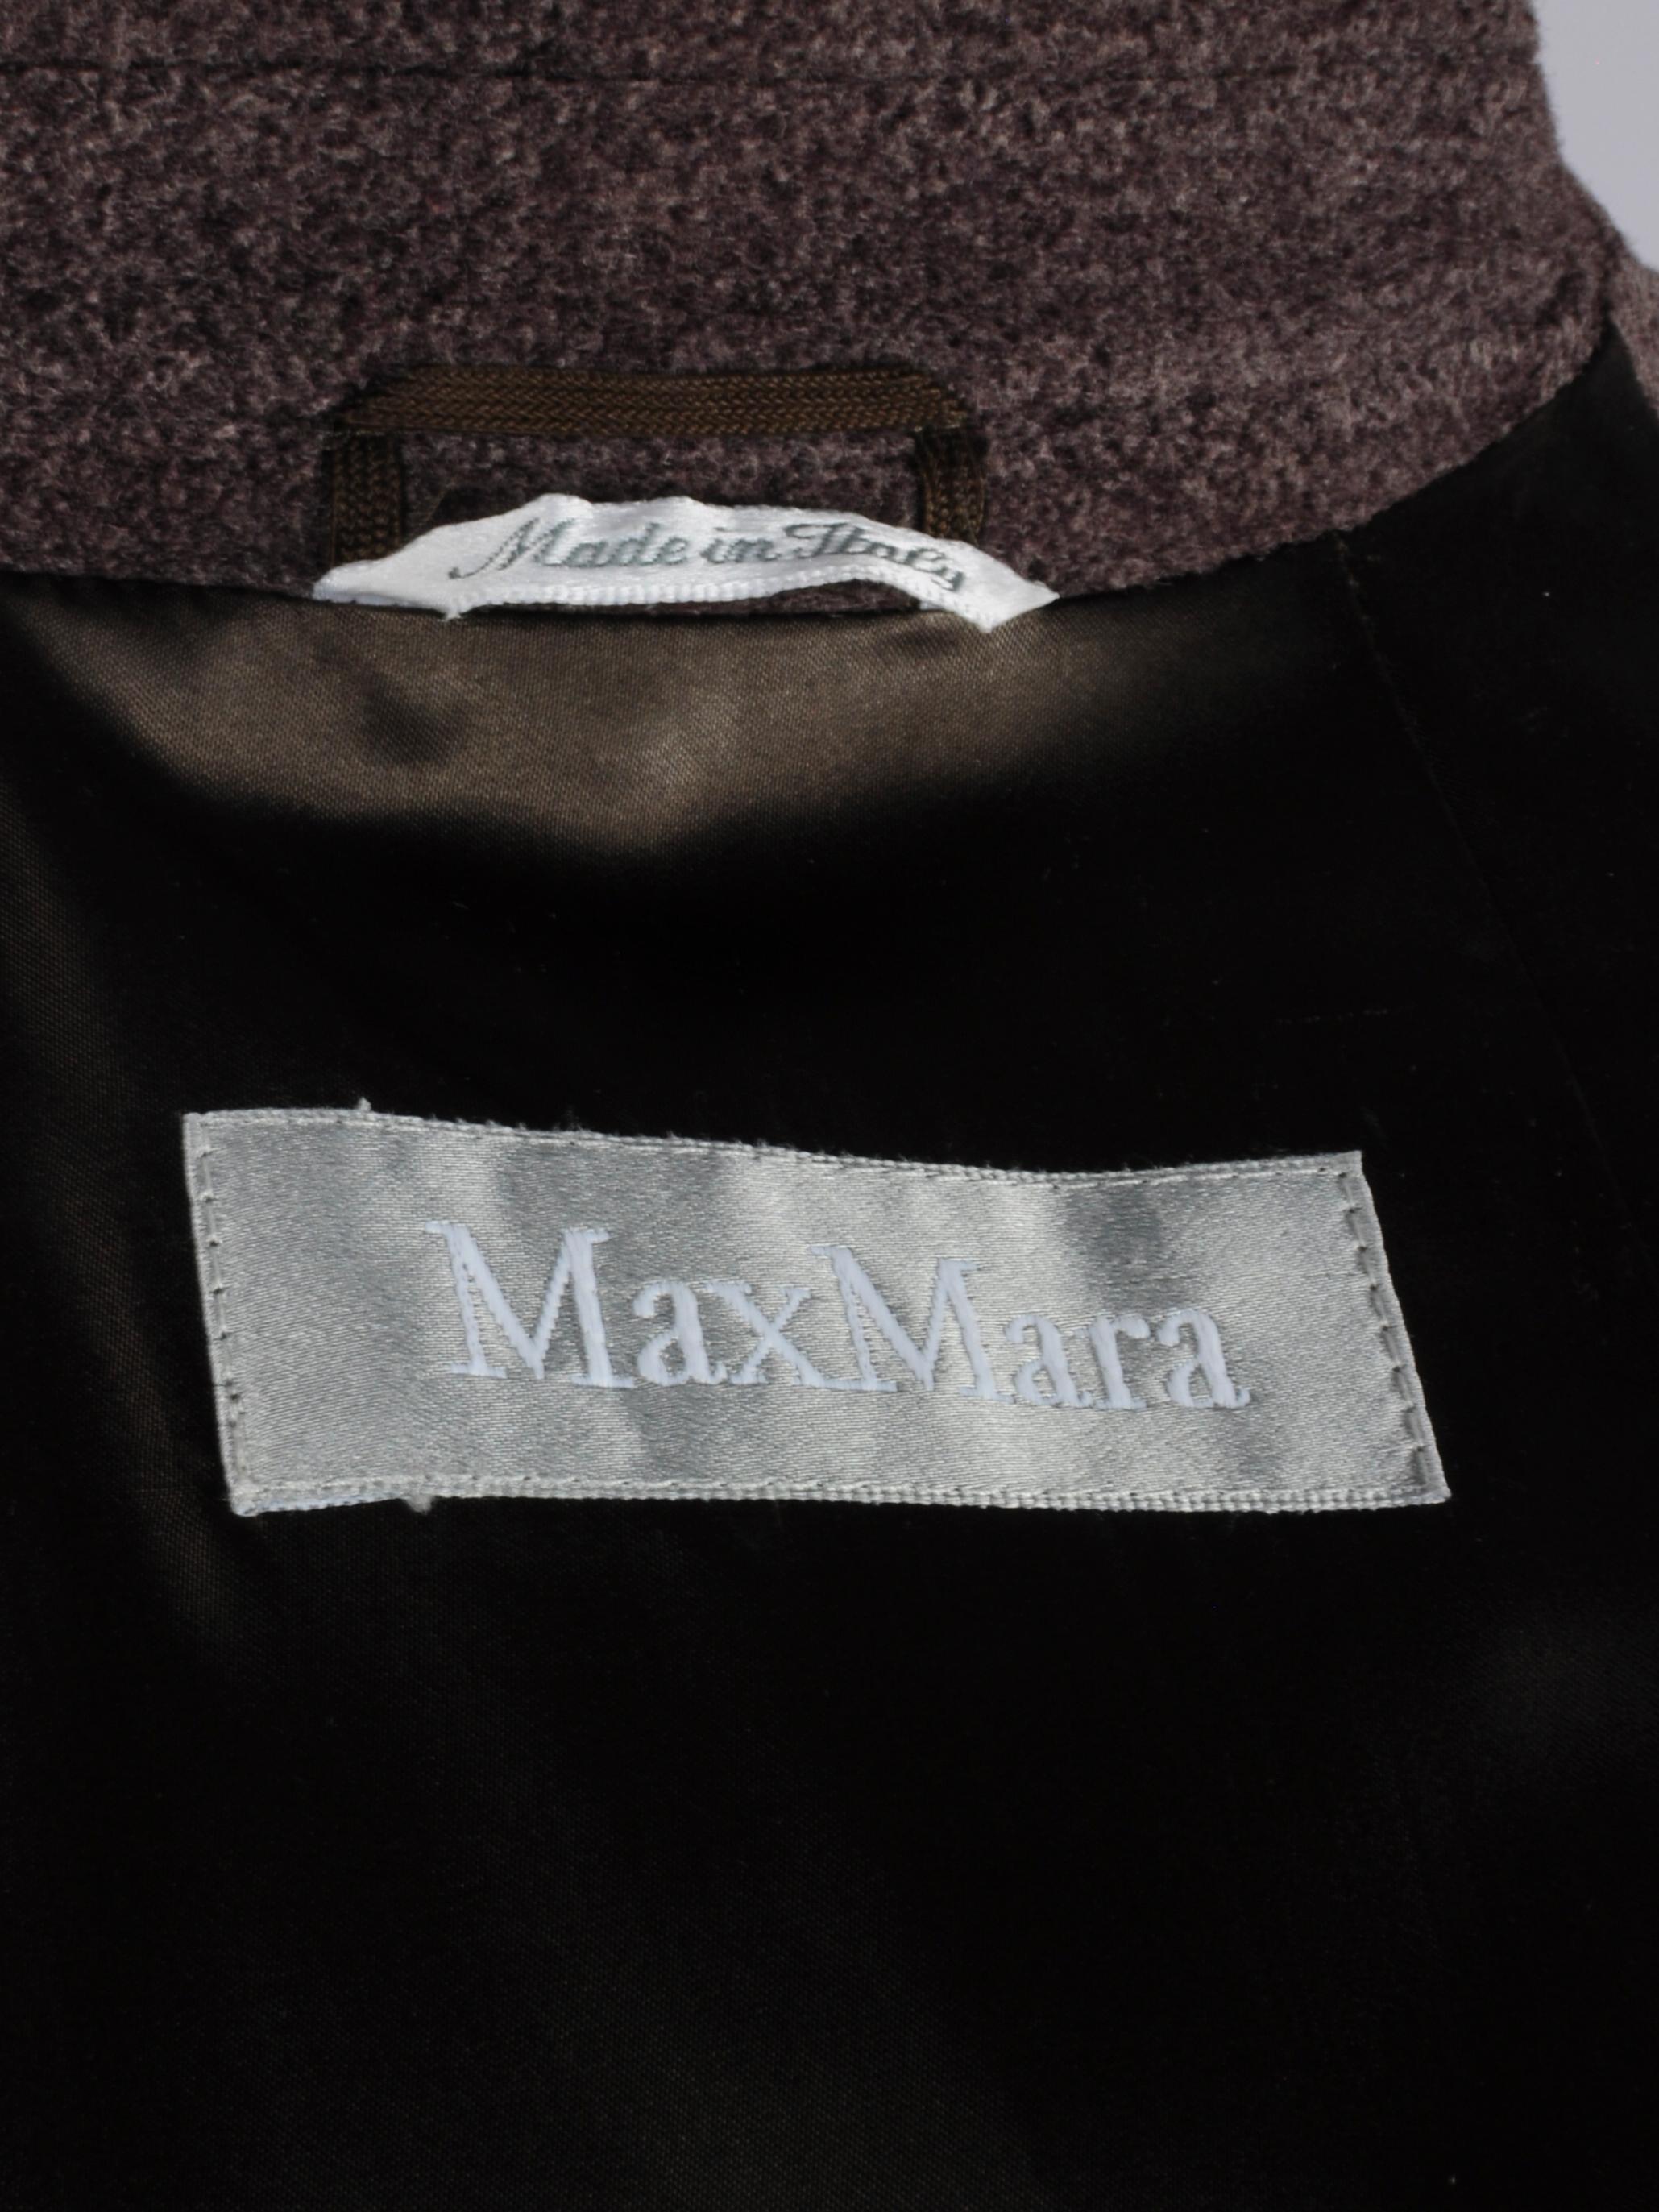 Max Mara Brown Coat Single Breasted Wool and Silk 1990s For Sale 6